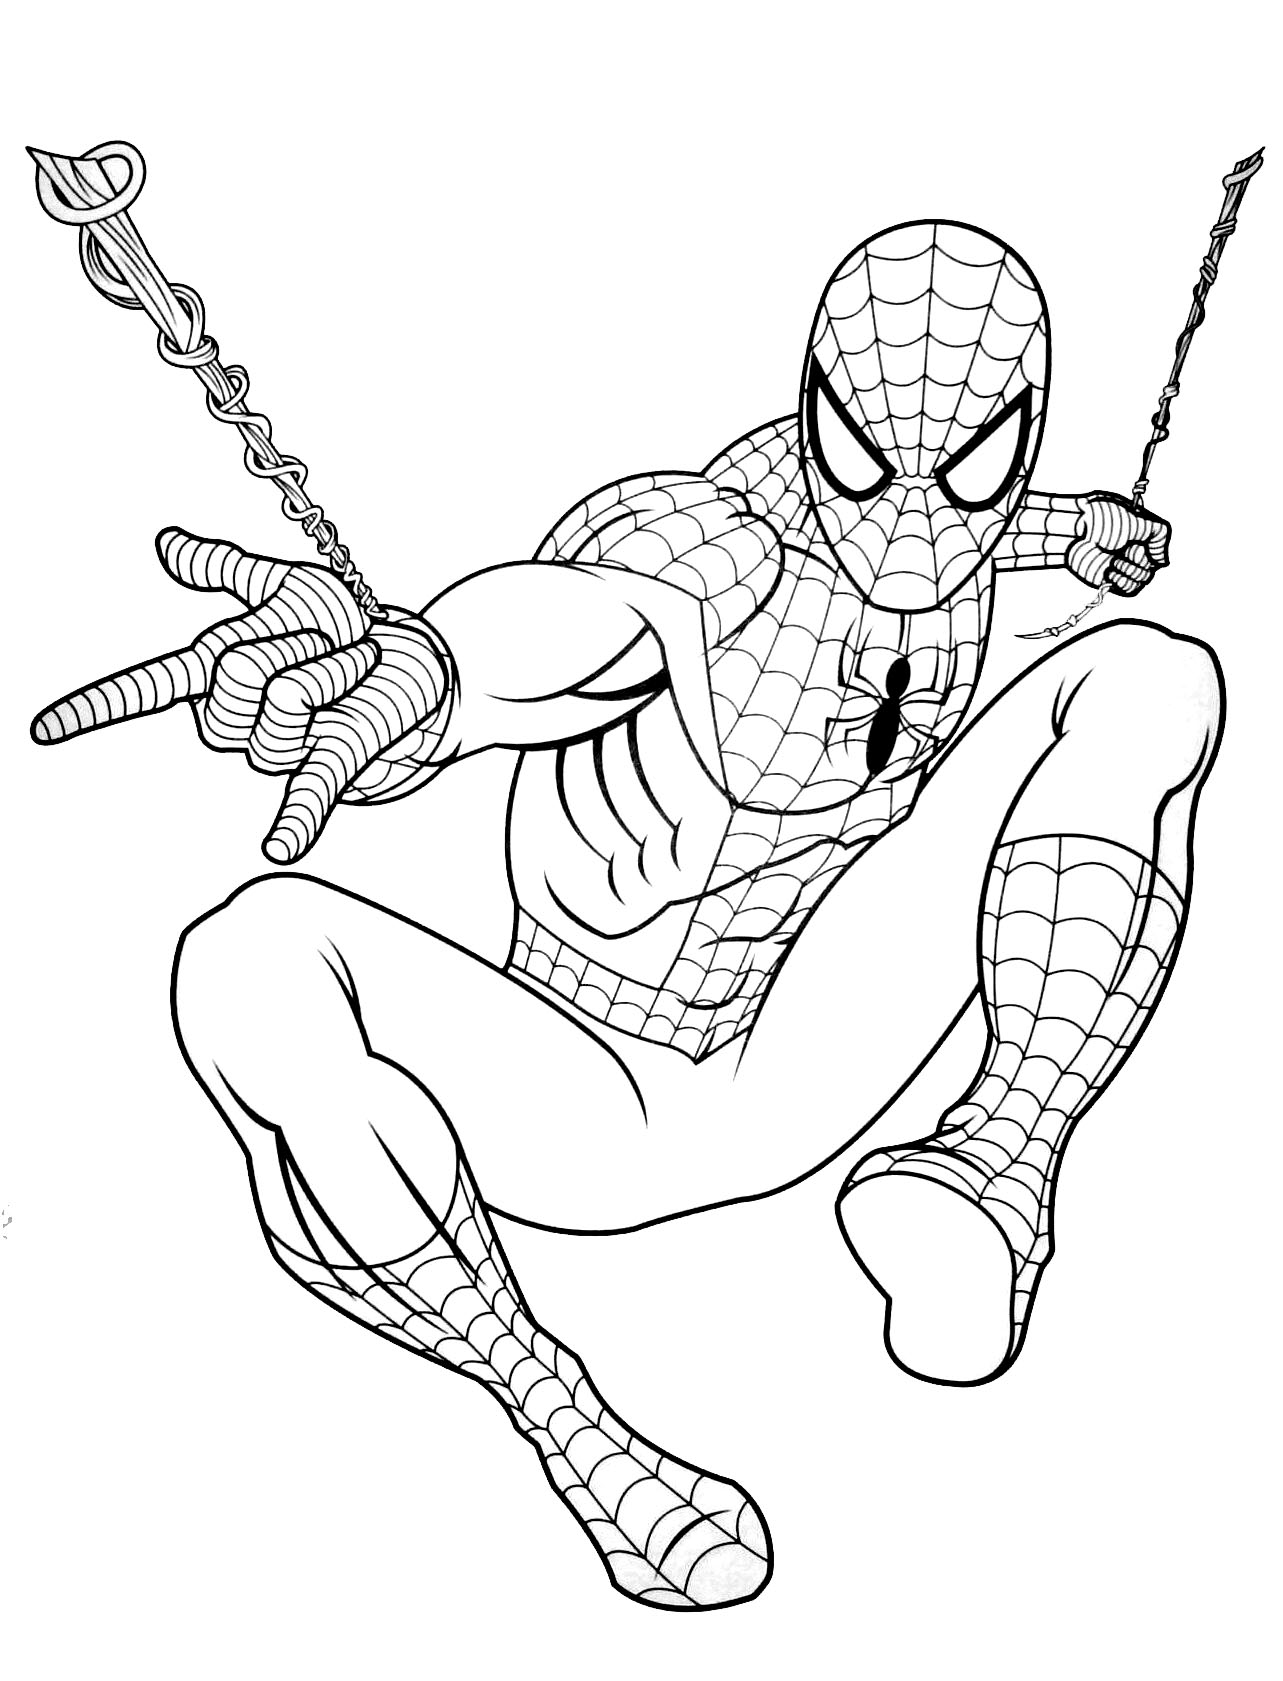 Free Spiderman drawing to print and color Spider Man Kids Coloring Pages